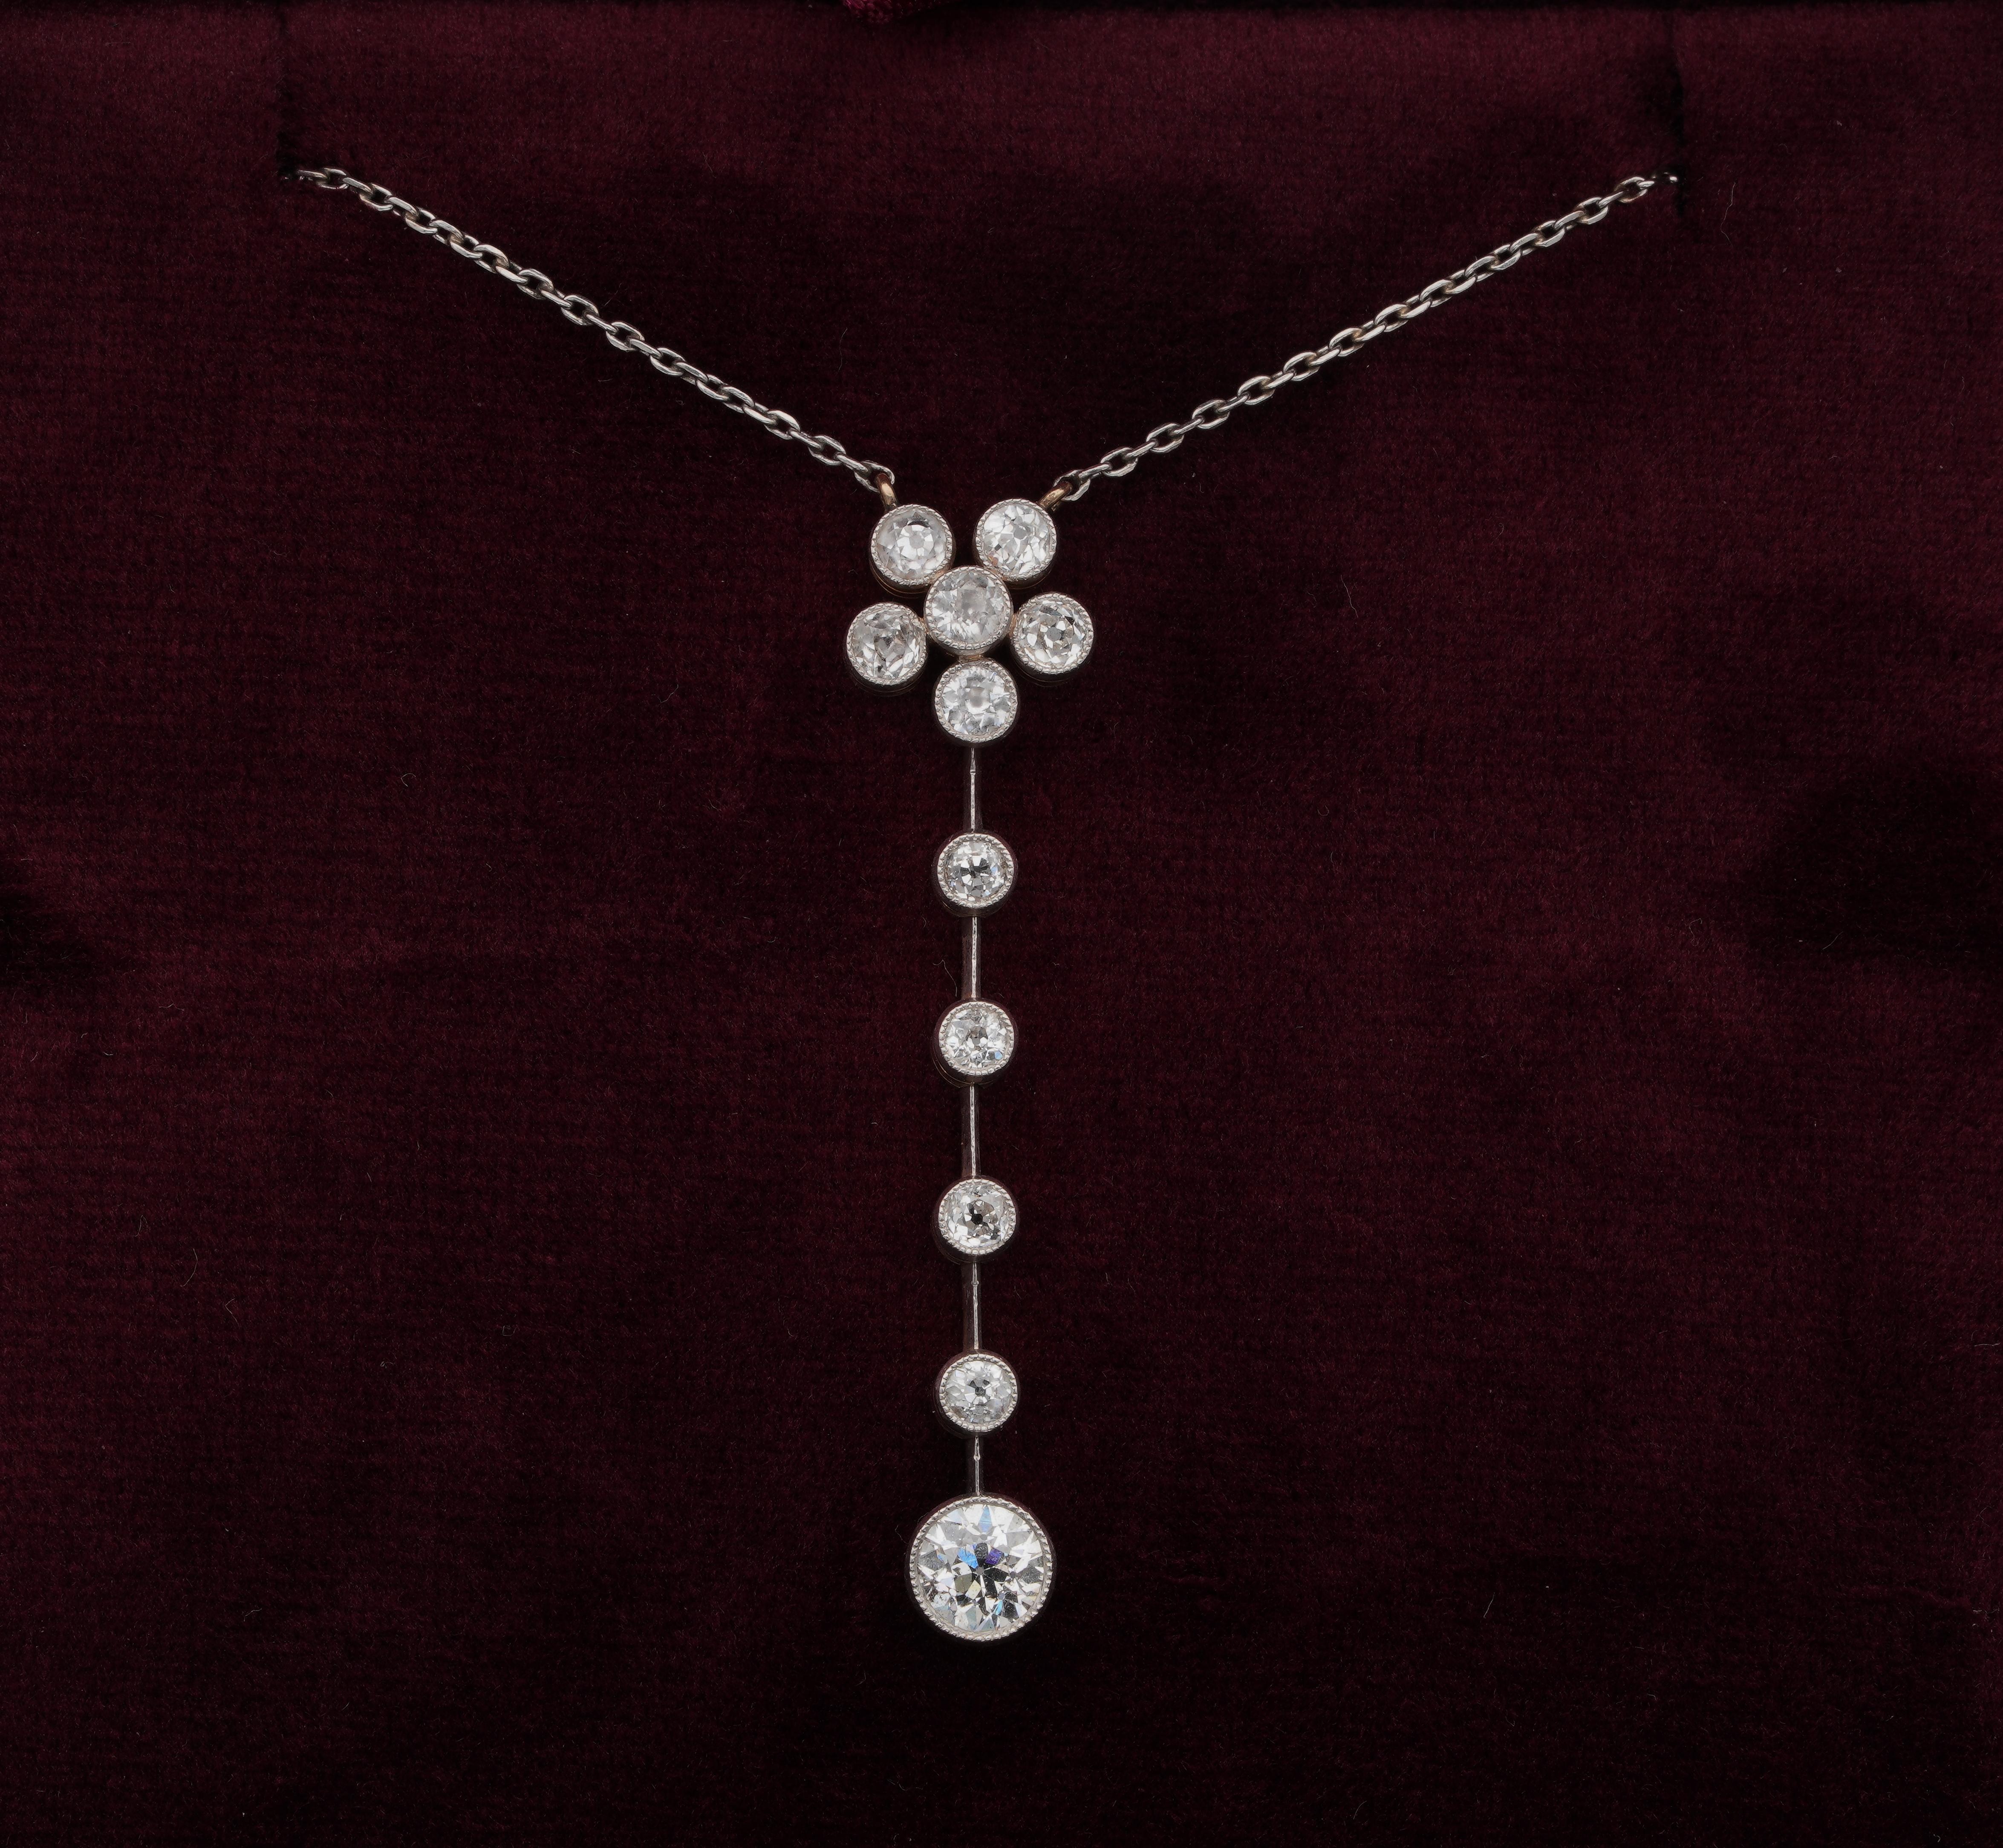 Elegance and delicacy

An exemplary Edwardian era Diamond negligee necklace expressing in full the everlasting elegance of the Belle Epoque era
All hand crafted of solid Platinum this necklace is all original untouched conditions
Fine selection of